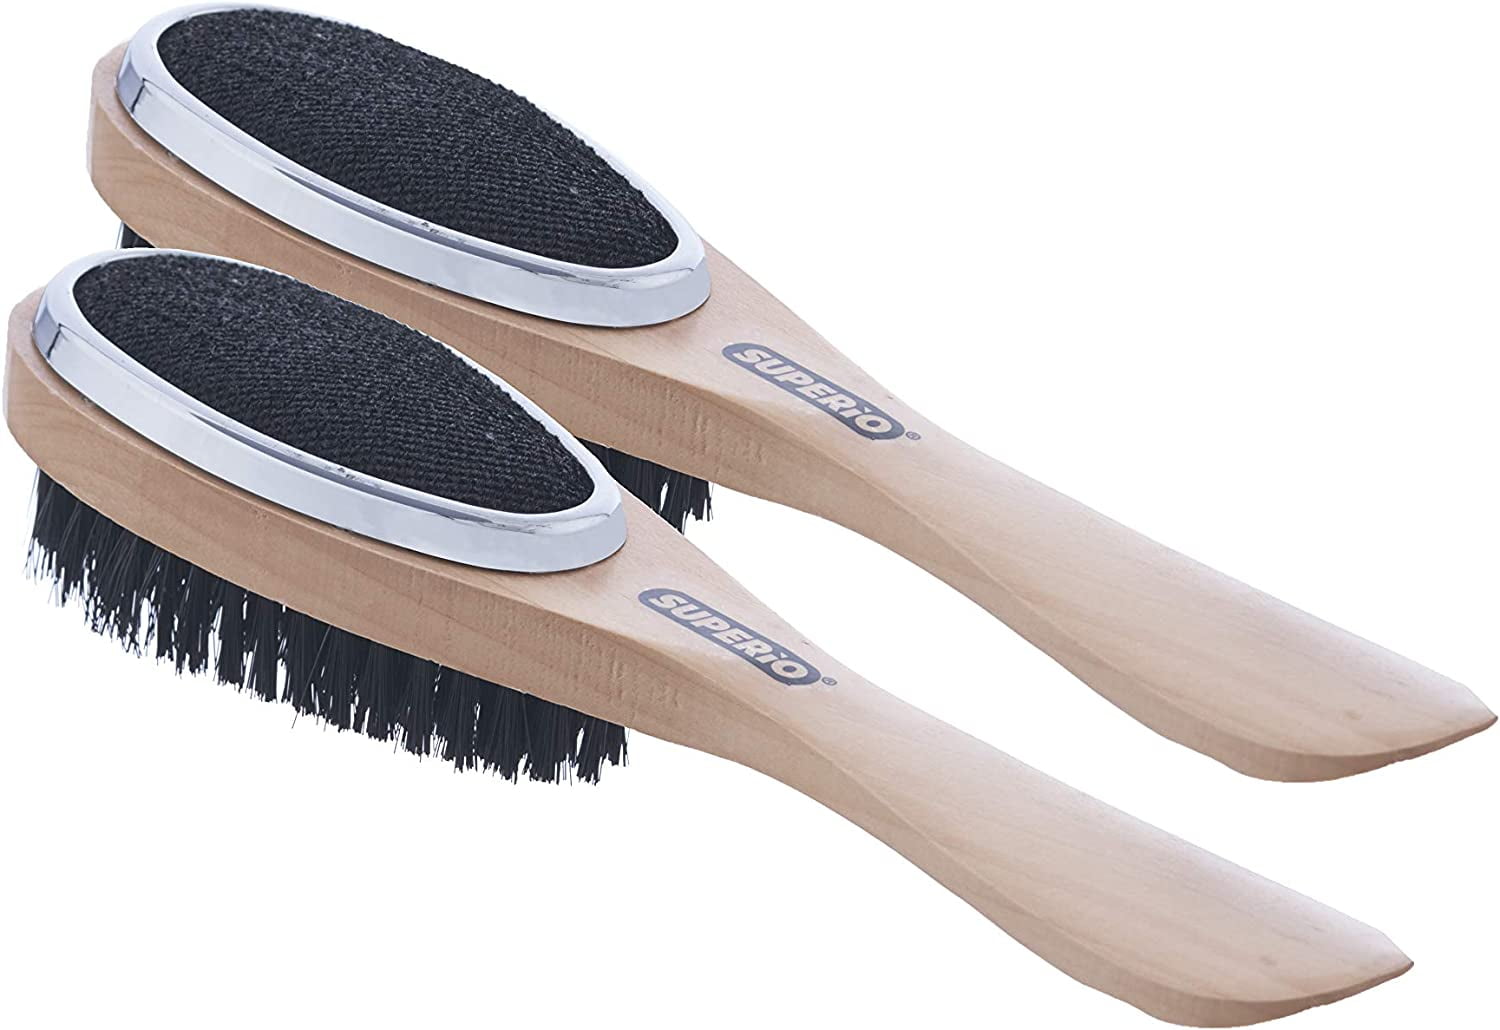  Home-it 3 in 1 Clothes Brushes Garment Care Clothes Brush and  lint Remover - Lint Brush and Shoe Horn : Health & Household